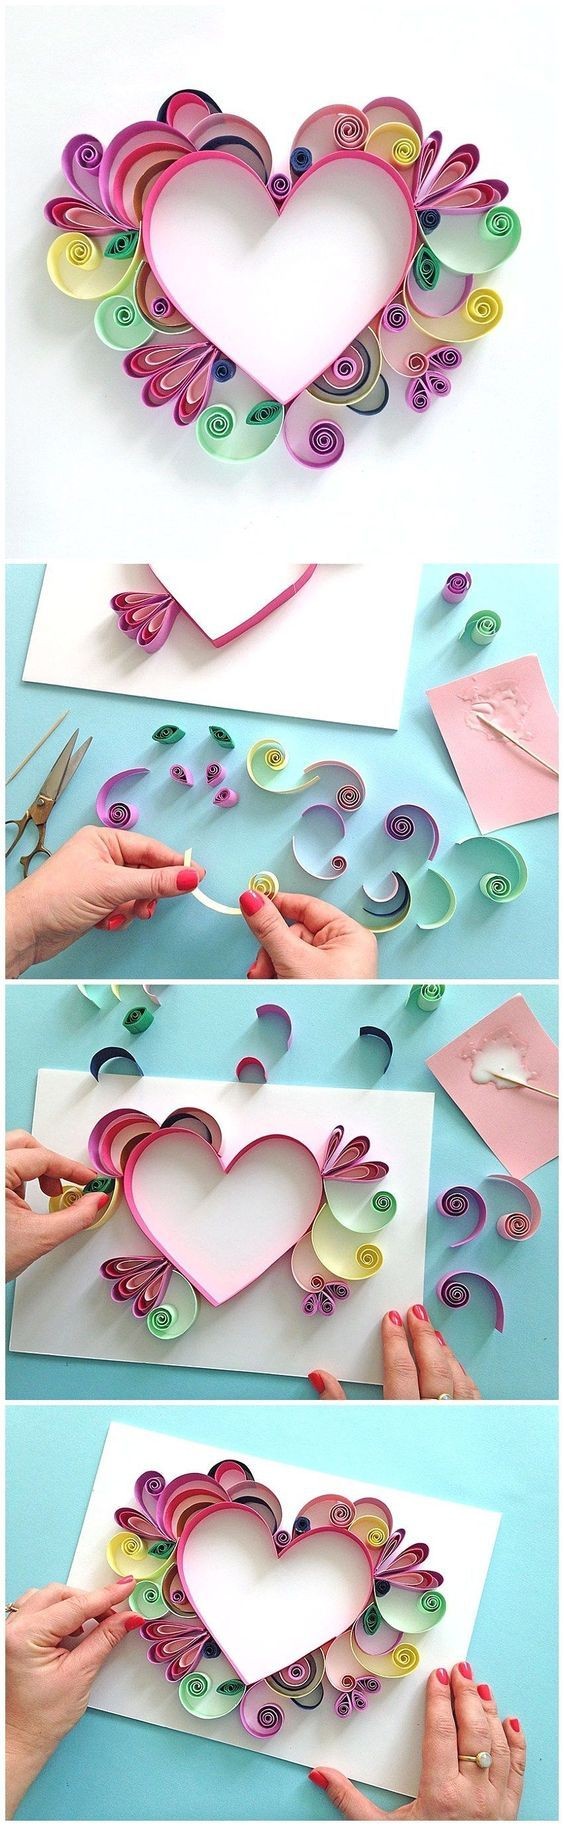 Papercraft Gifts Learn How to Quill A Darling Heart Shaped Mother S Day Paper Craft